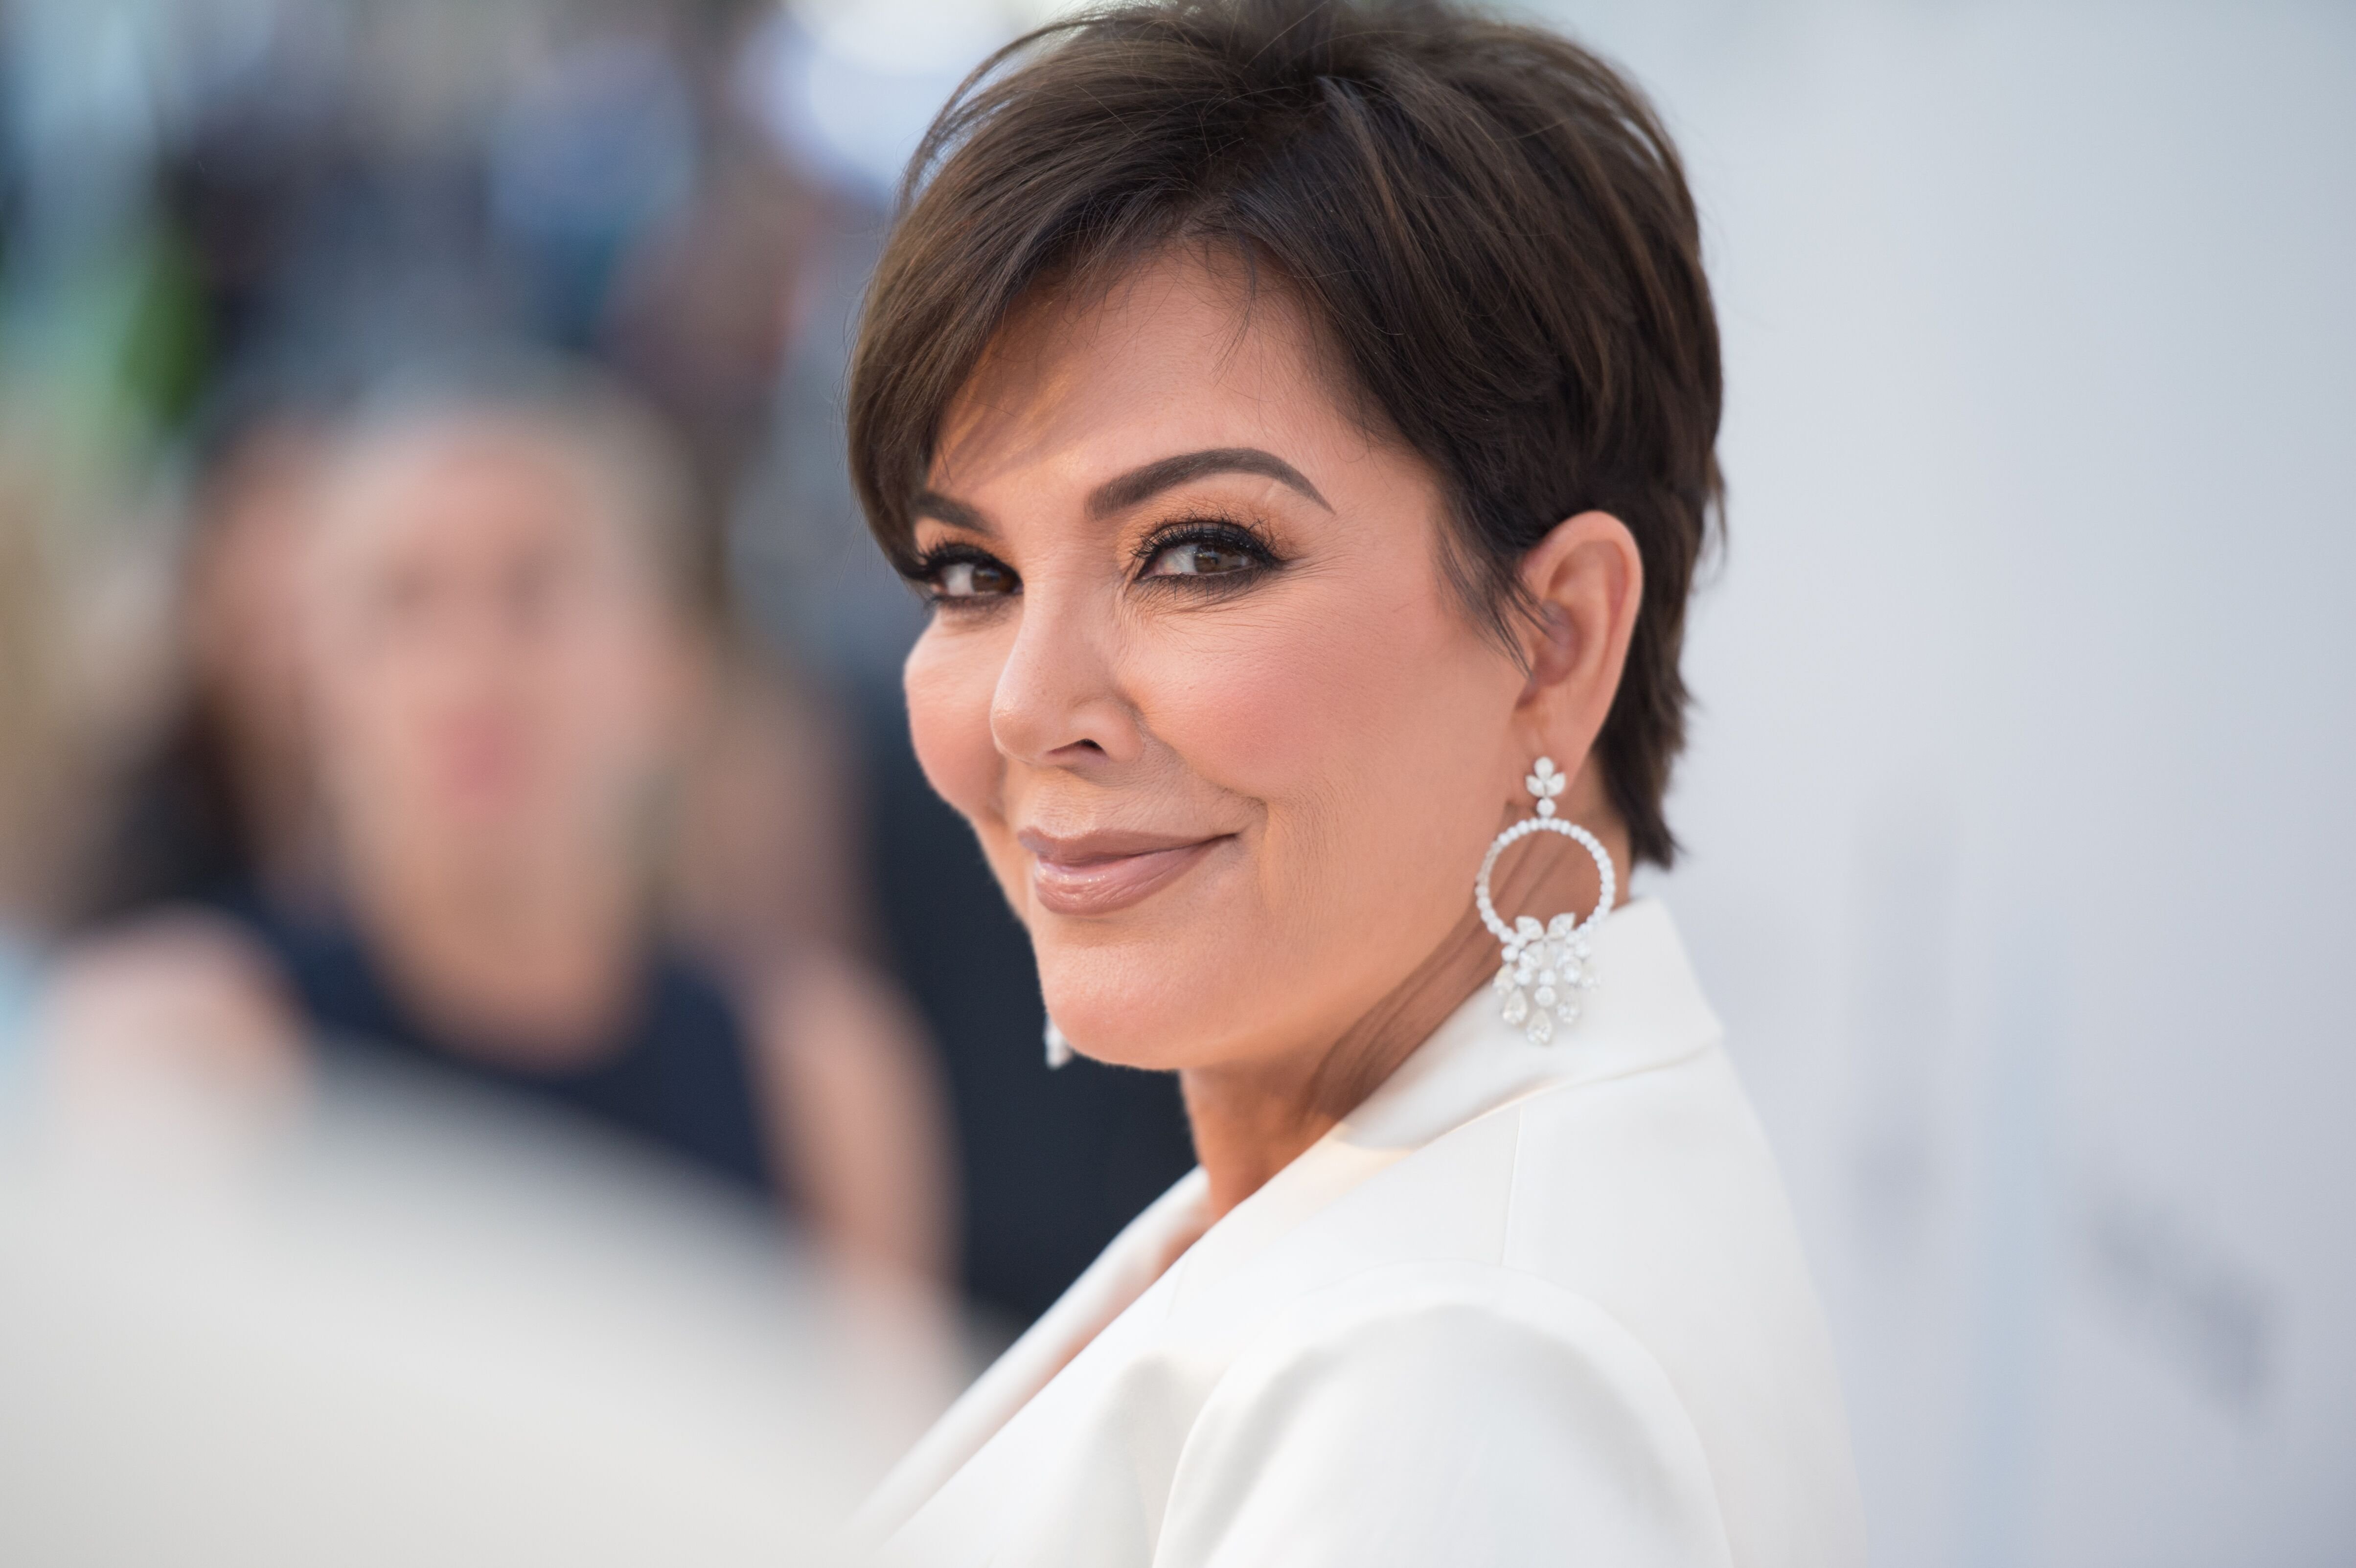 Kris Jenner attends the amfAR Cannes Gala 2019 at Hotel du Cap-Eden-Roc on May 23, 2019 in Cap d'Antibes, France | Source: Getty Images